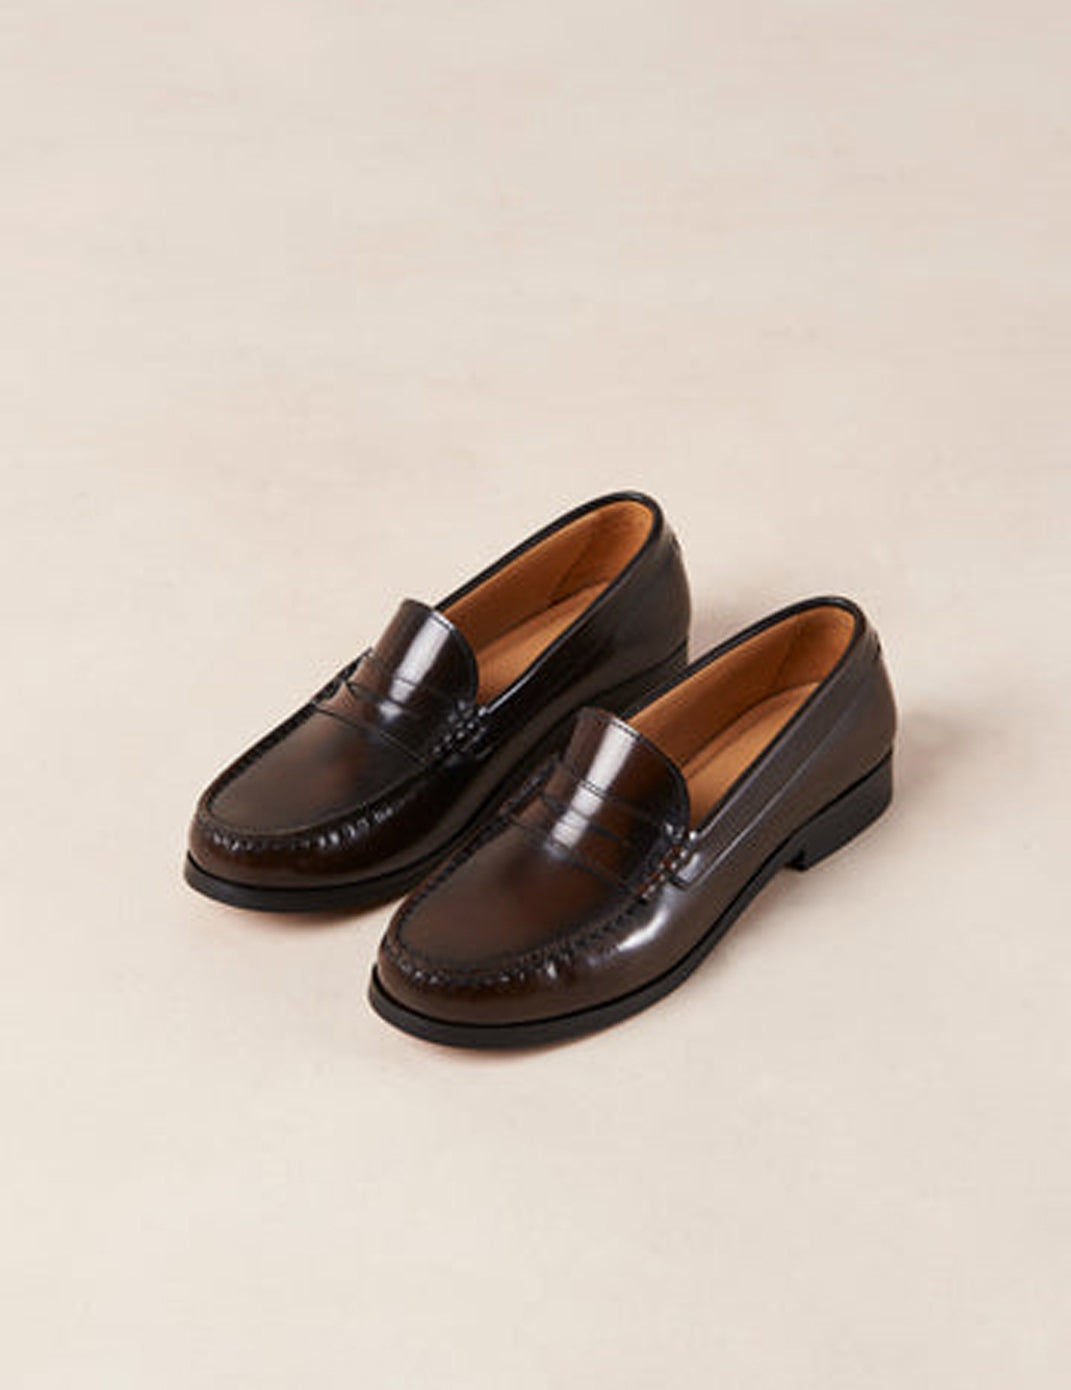 RIVET BRUSHED COFFEE BROWN LEATHER LOAFERS